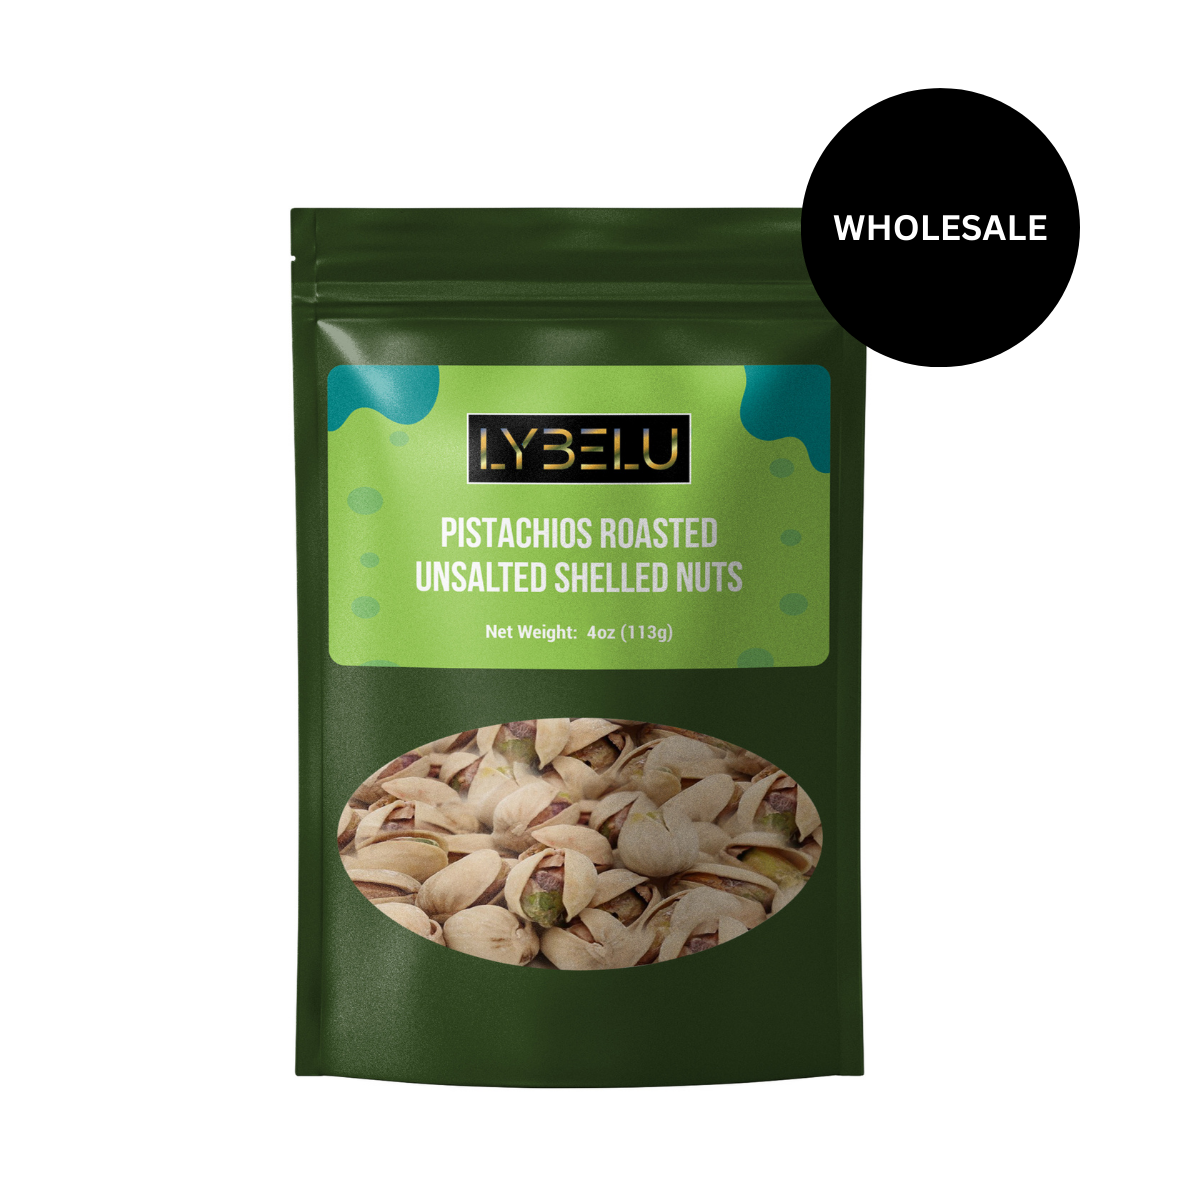 Pistachios Roasted Unsalted Shelled Nuts – 4oz